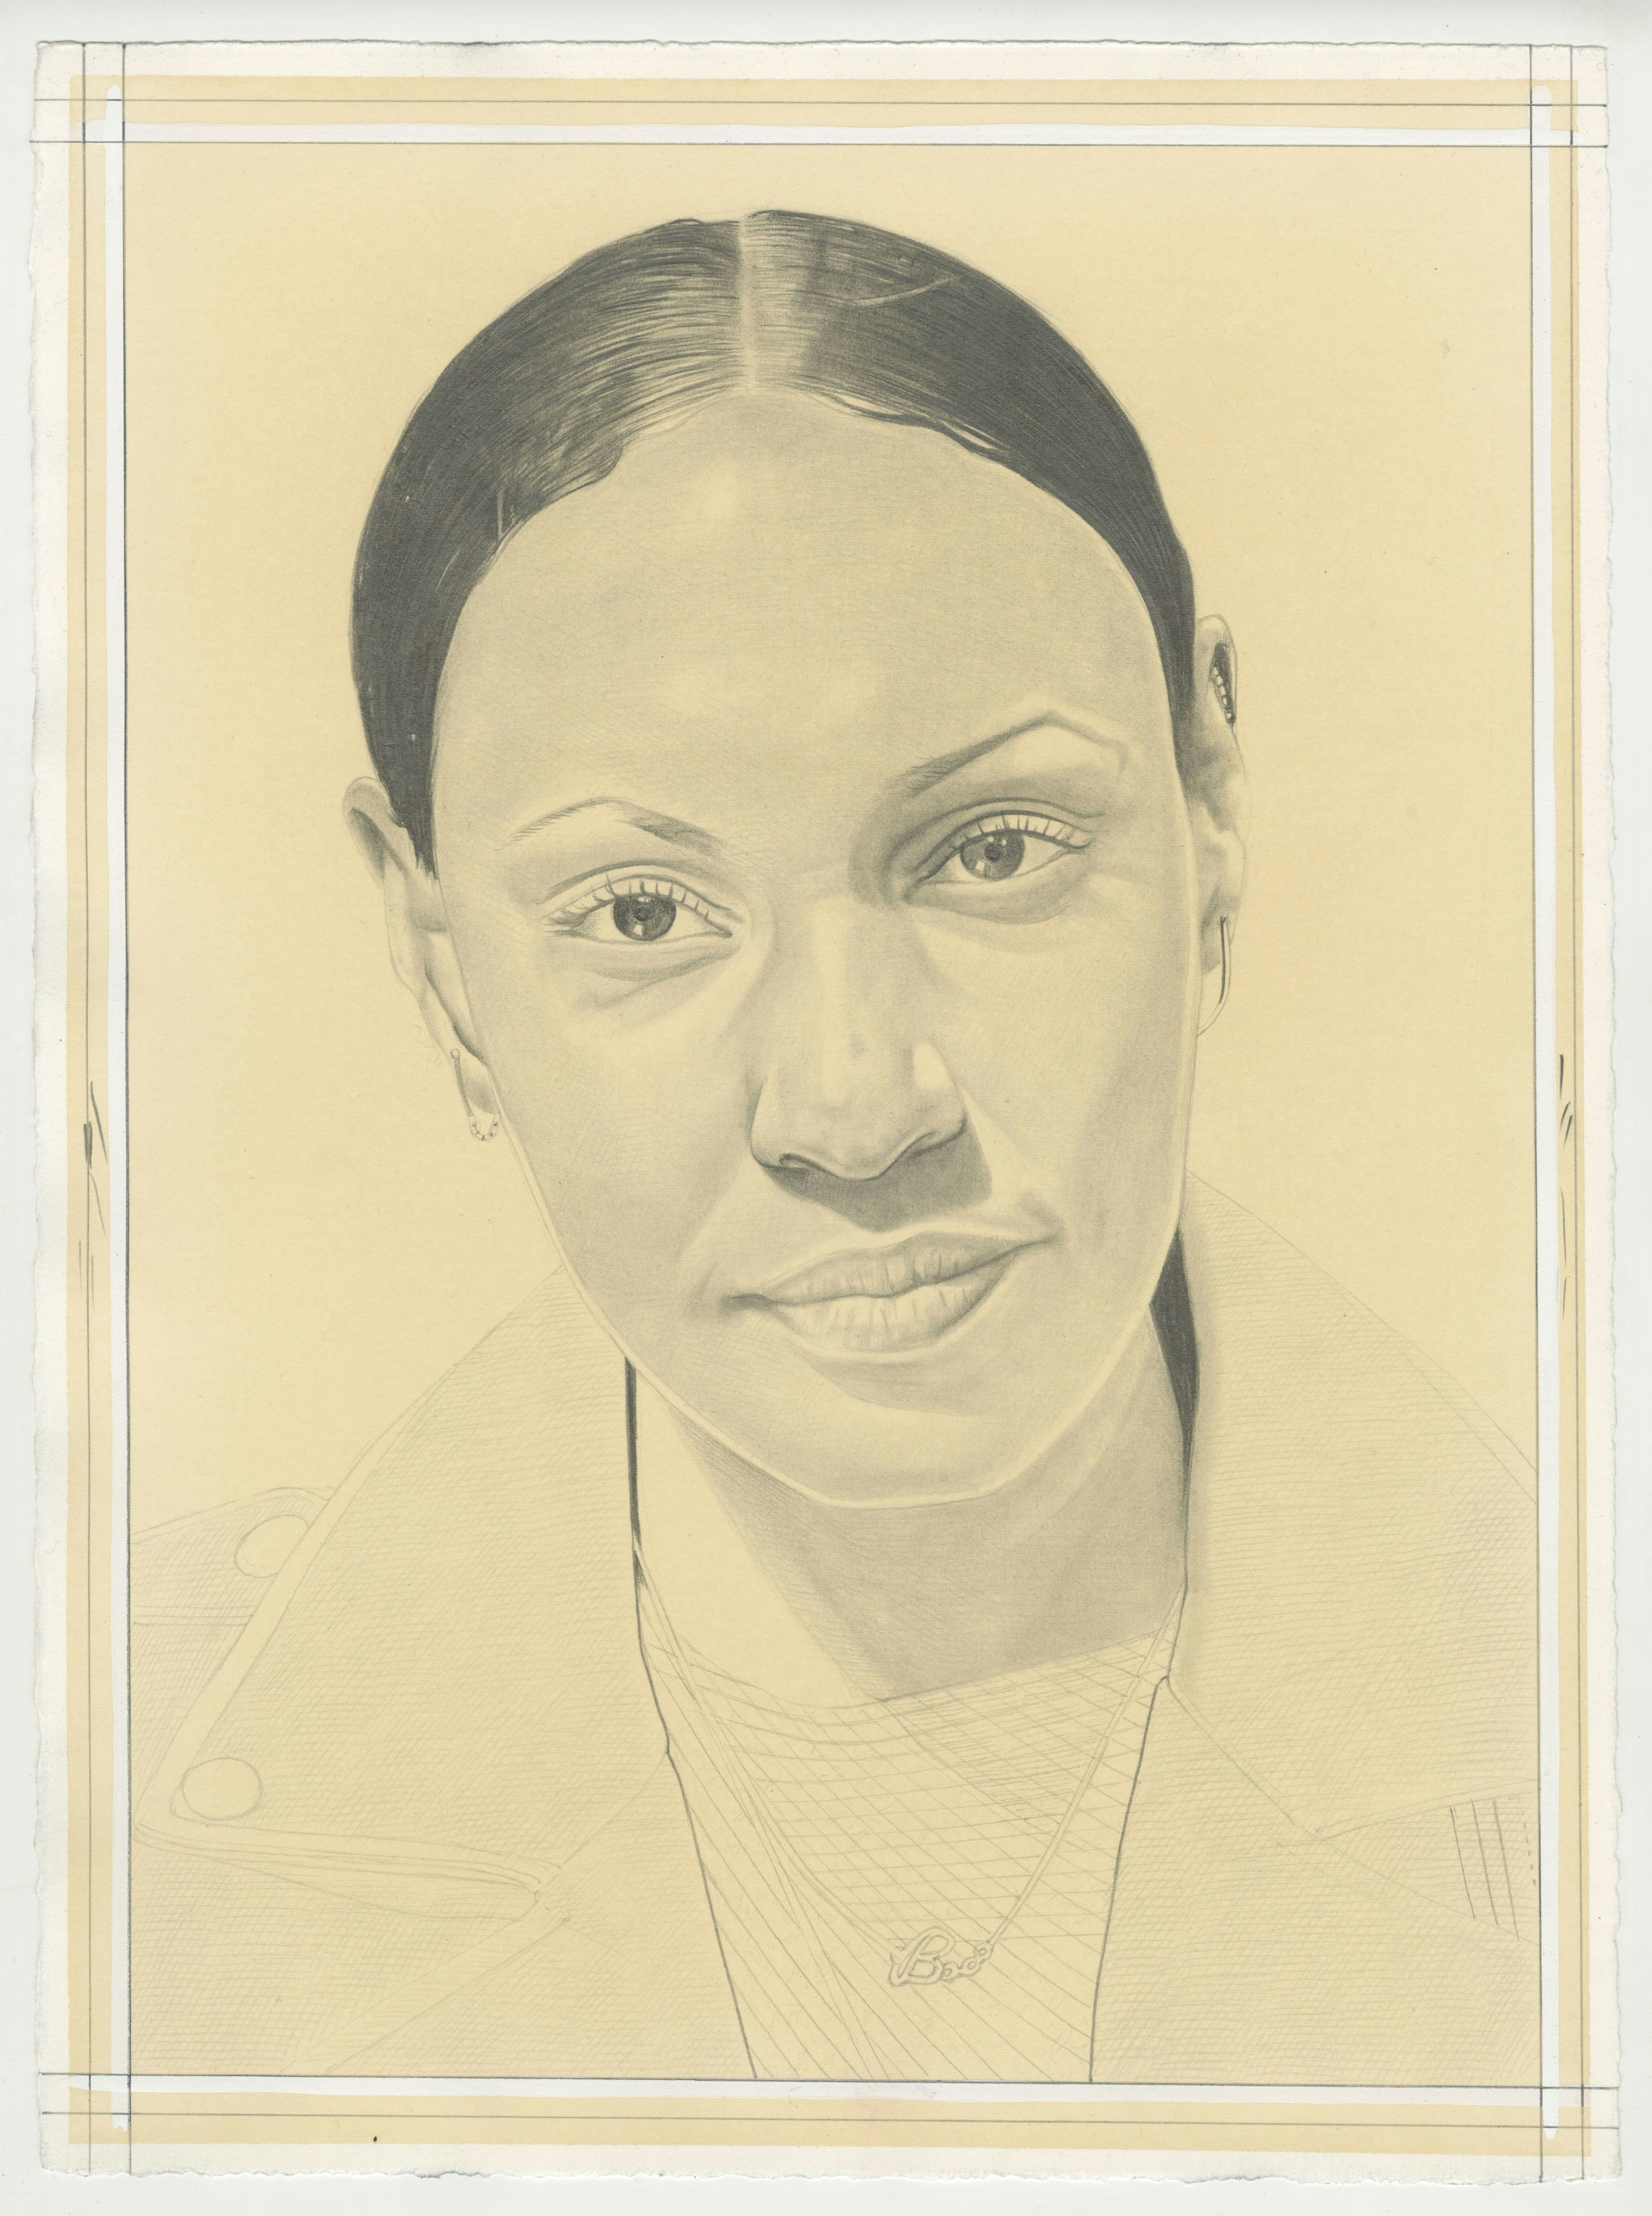 Portrait of Nico Wheadon, pencil on paper by Phong Bui.